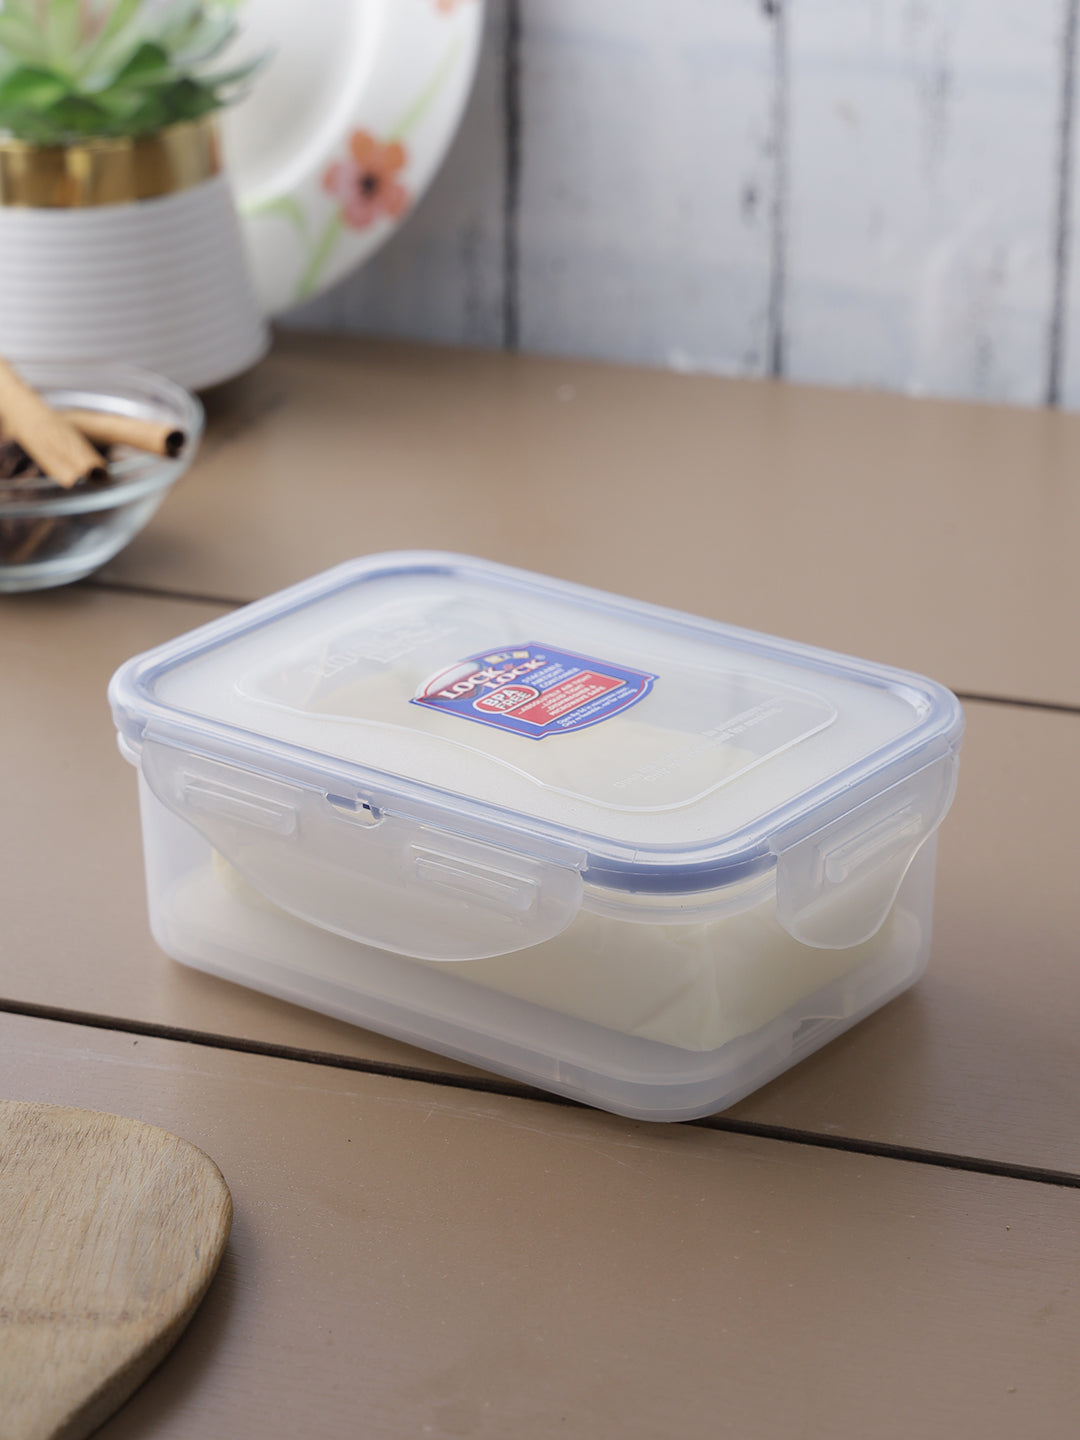 LocknLock Classics Small Flat Rectangular Food Container with Tray | Butter Case